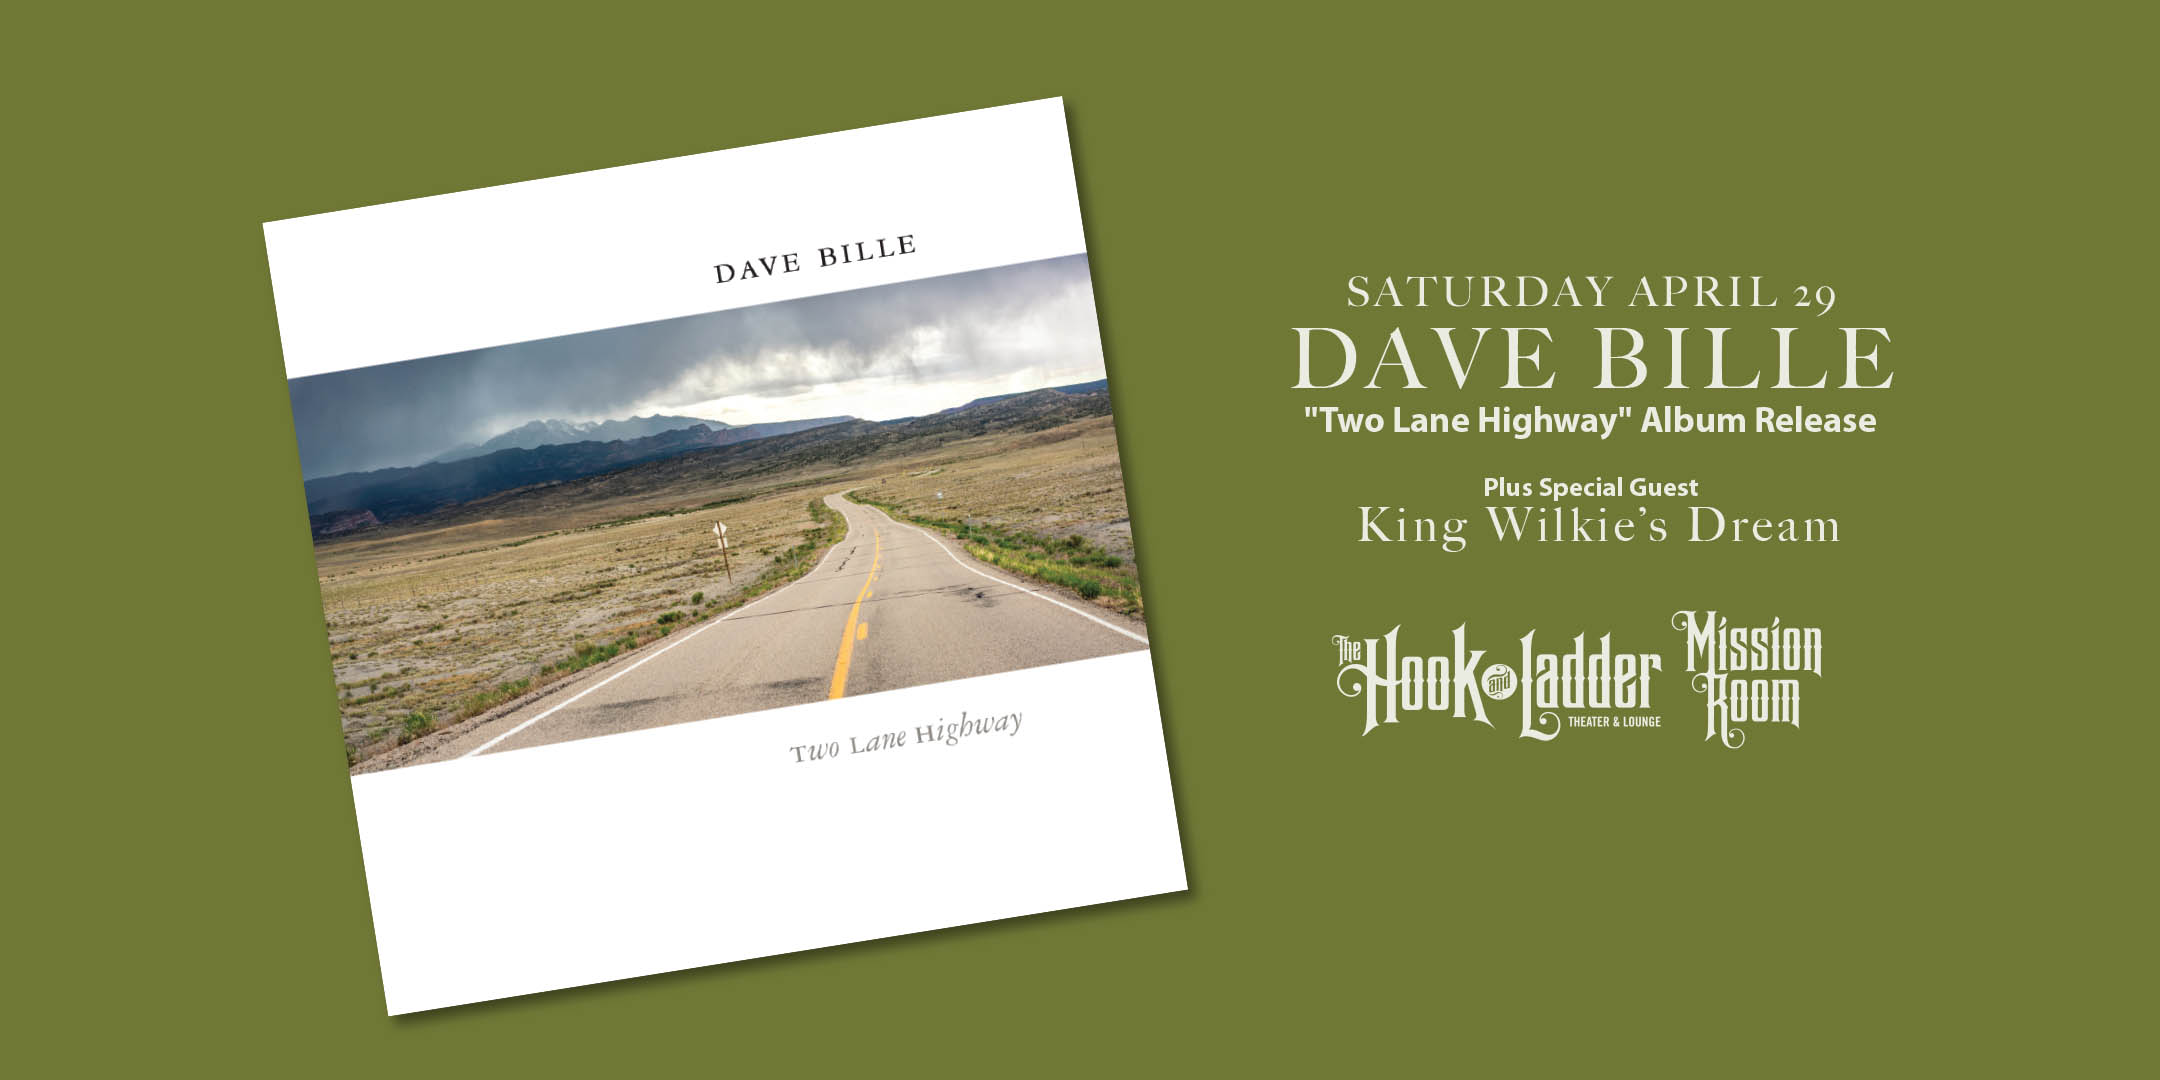 Dave Bille "Two Lane Highway" Album Release Plus Special Guest King Wilkie’s Dream Saturday, April 29, 2023 The Mission Room Doors 6:30pm :: Music 7:00pm :: 21+ General Admission: $15 ADV / $20 DOS